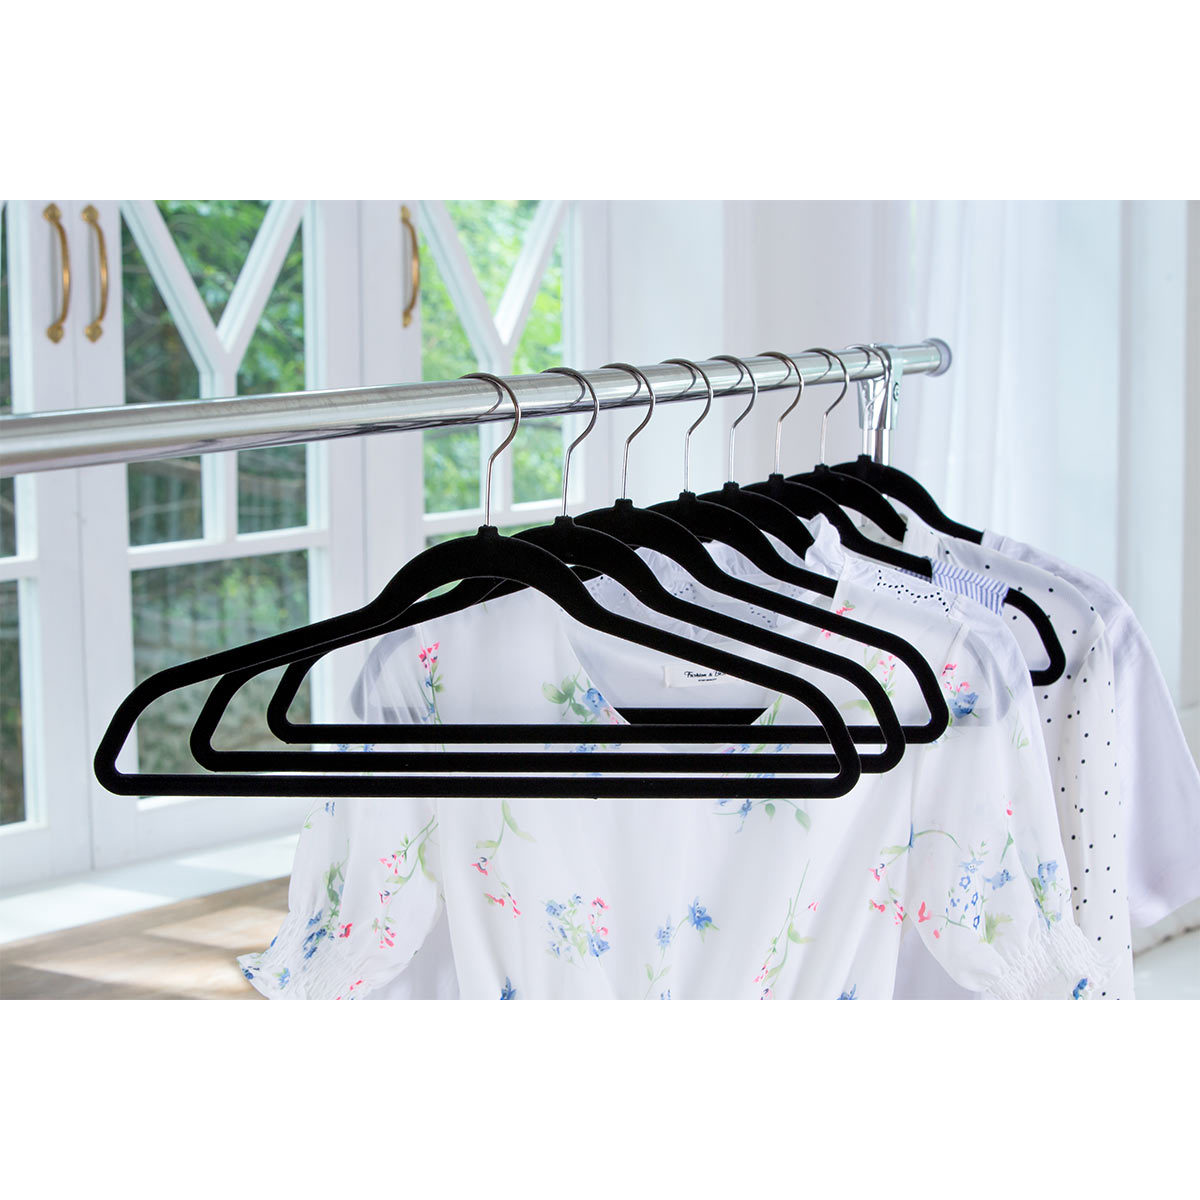 How to stop clothes from slipping off hangers?